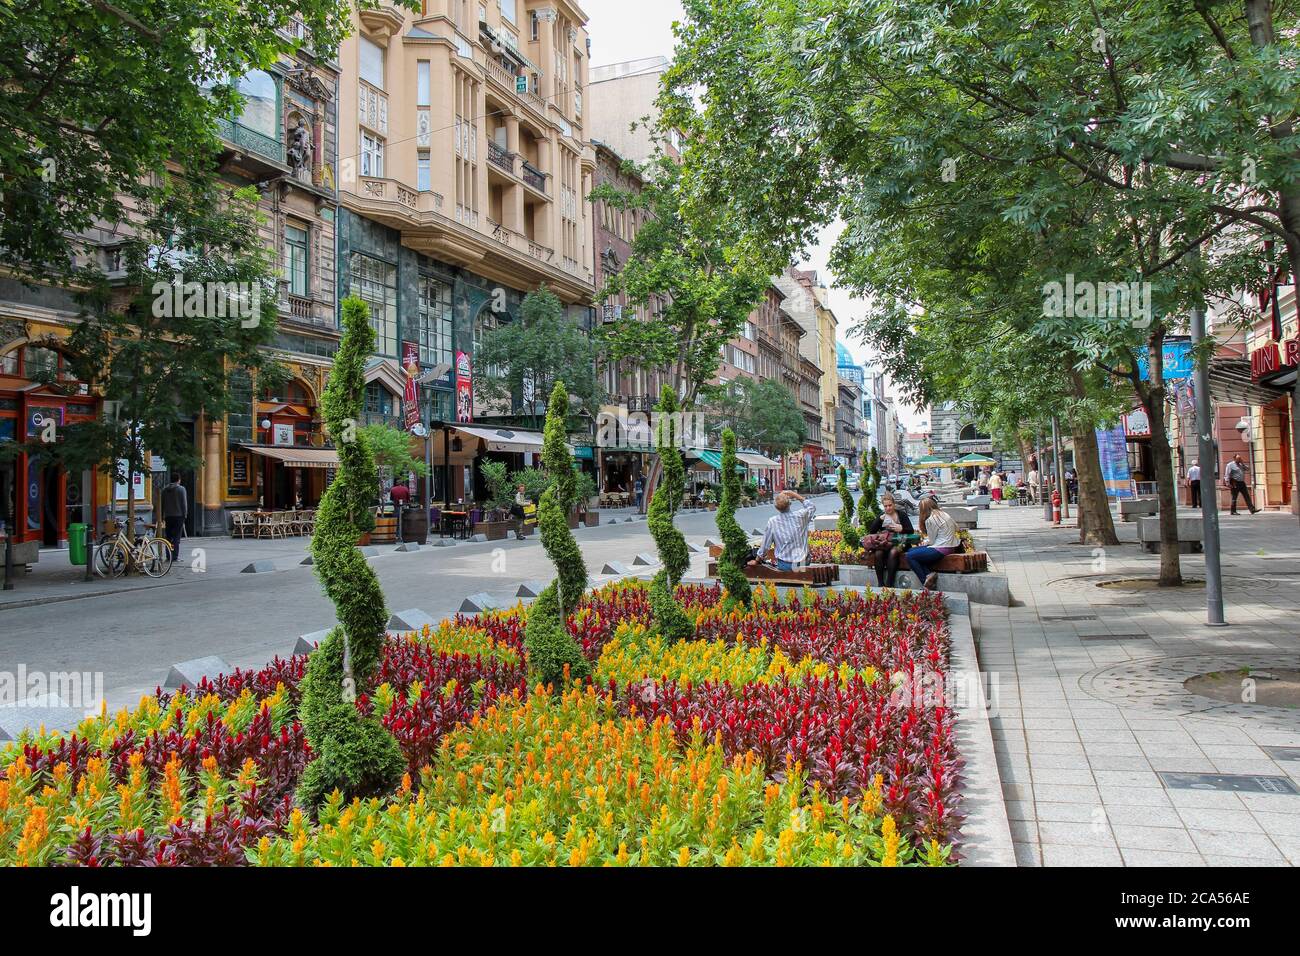 Budapest, Hungary - June 28th 2013: Flower bed on a Budapest street in Summer, Hungary Stock Photo